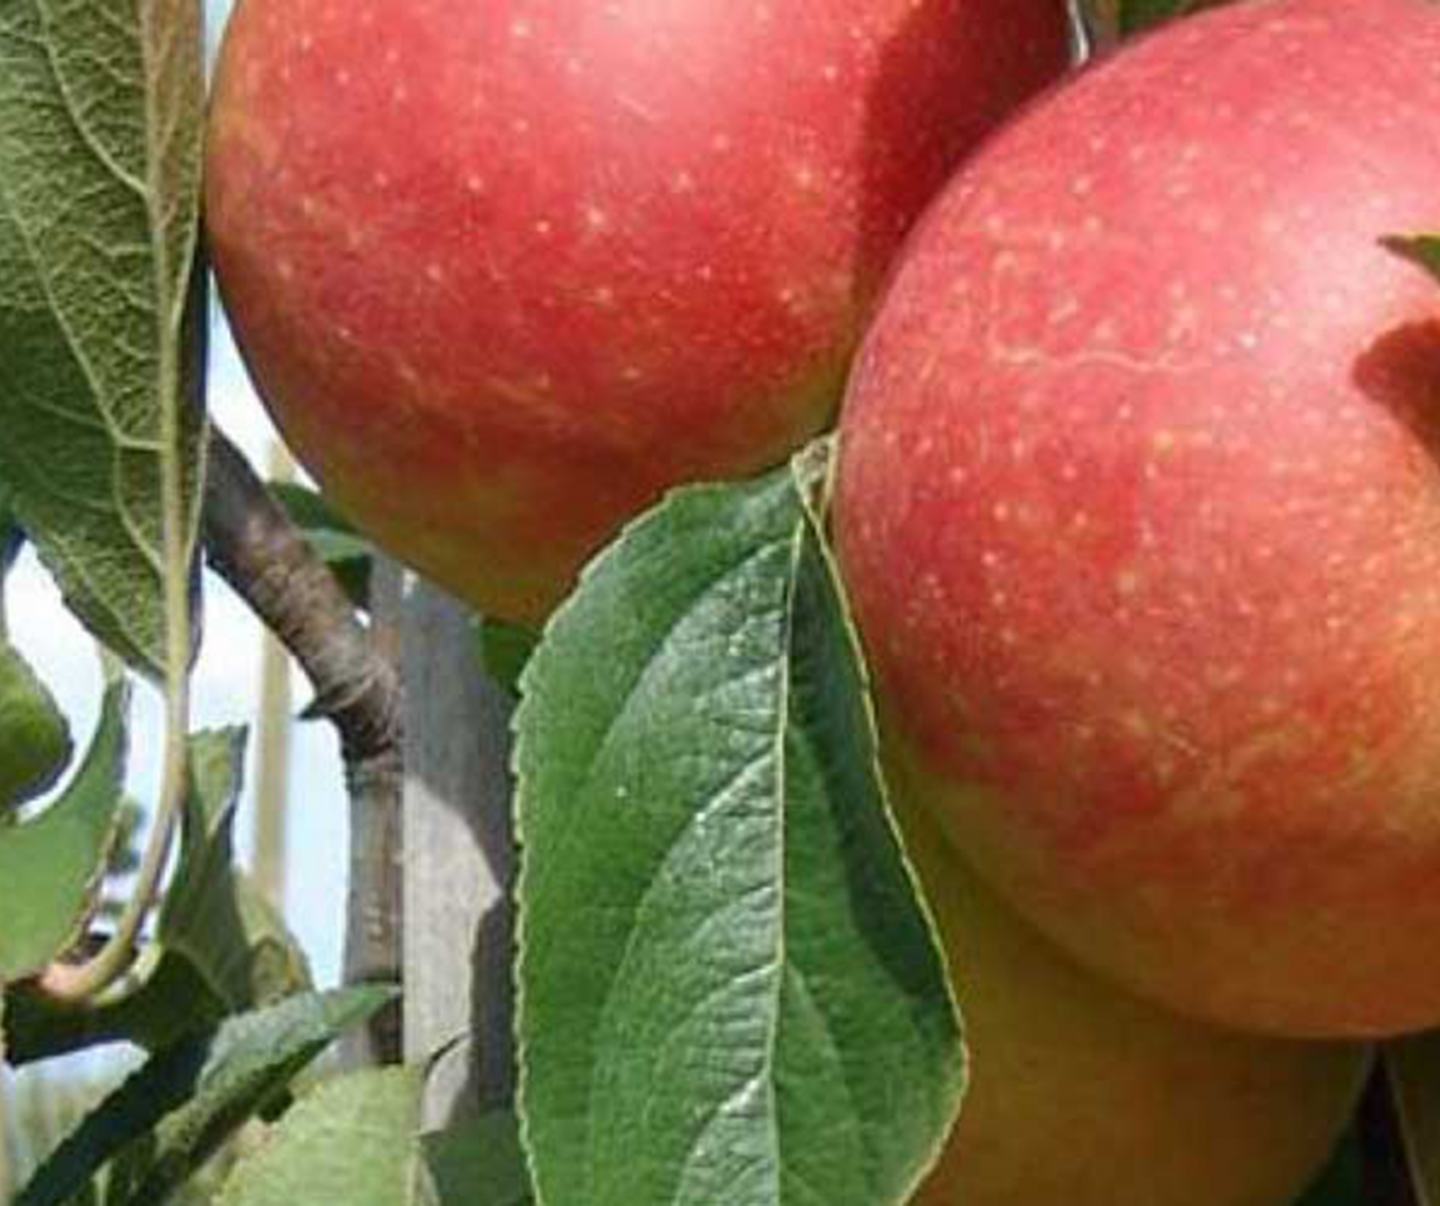 Detailed image of apples